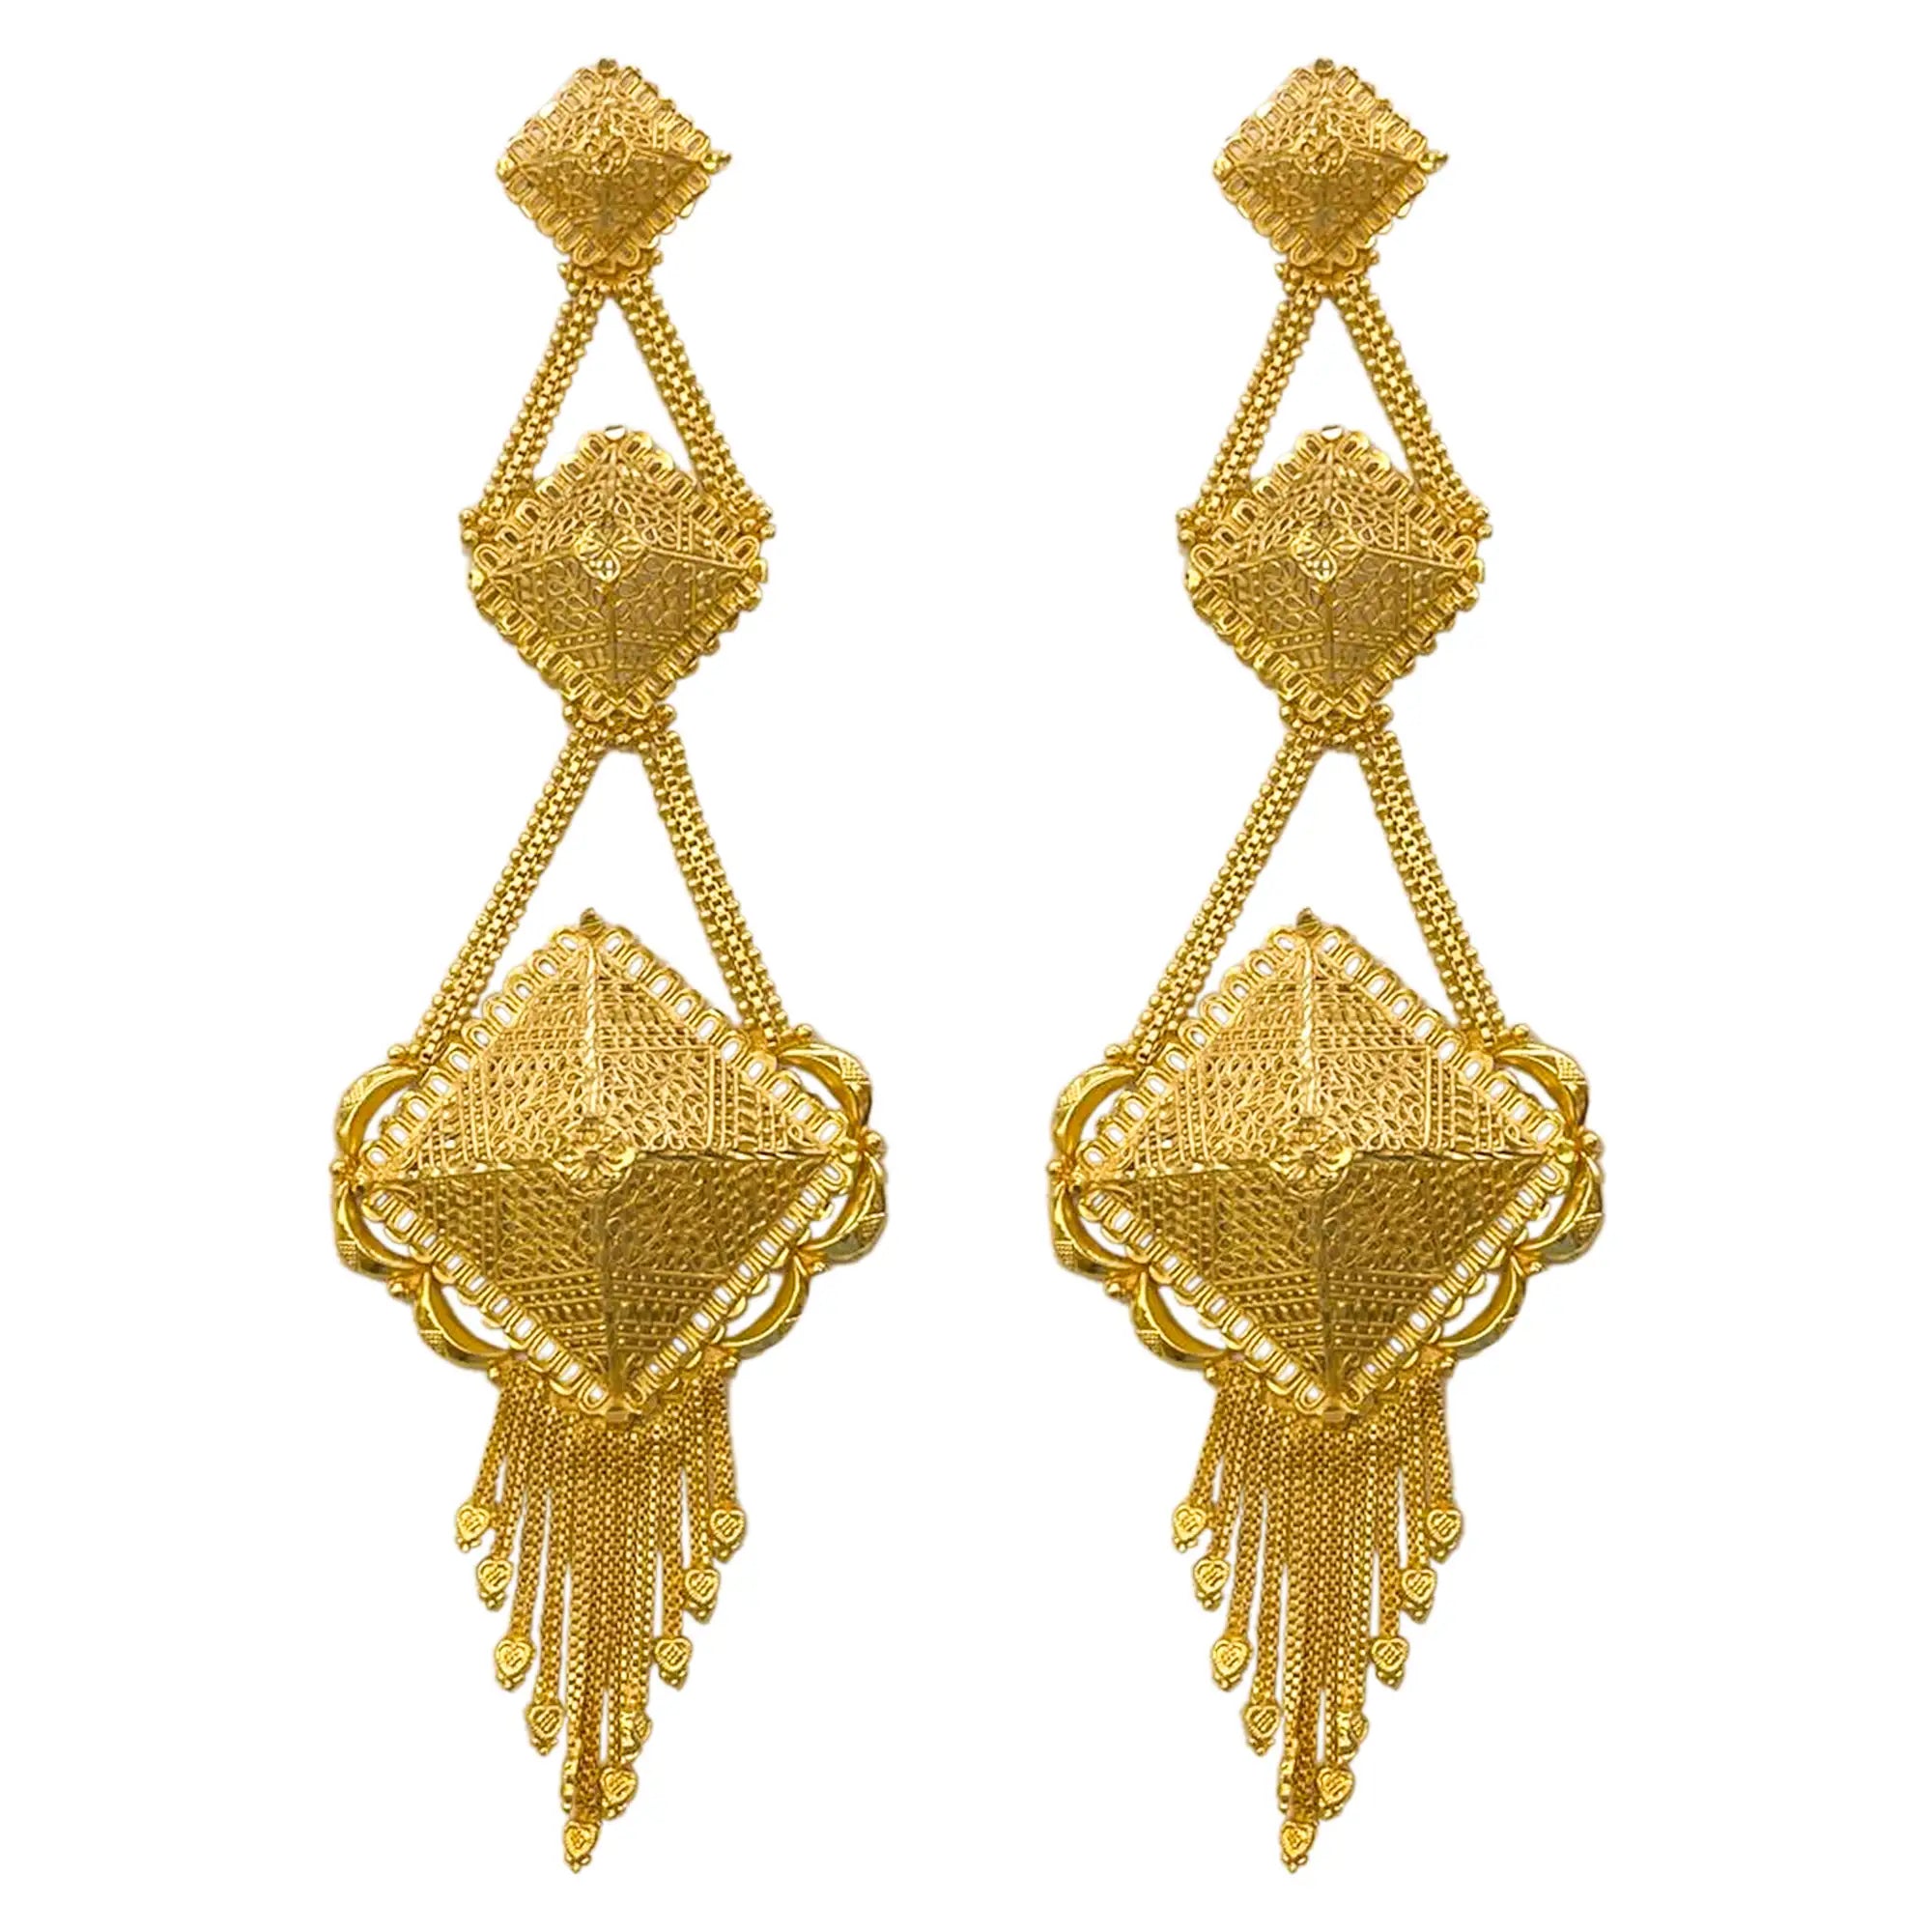 Gold-Plated Earrings, Long Statement Earrings, Gold-Plated Jewelry, Indian Jewelry Mall